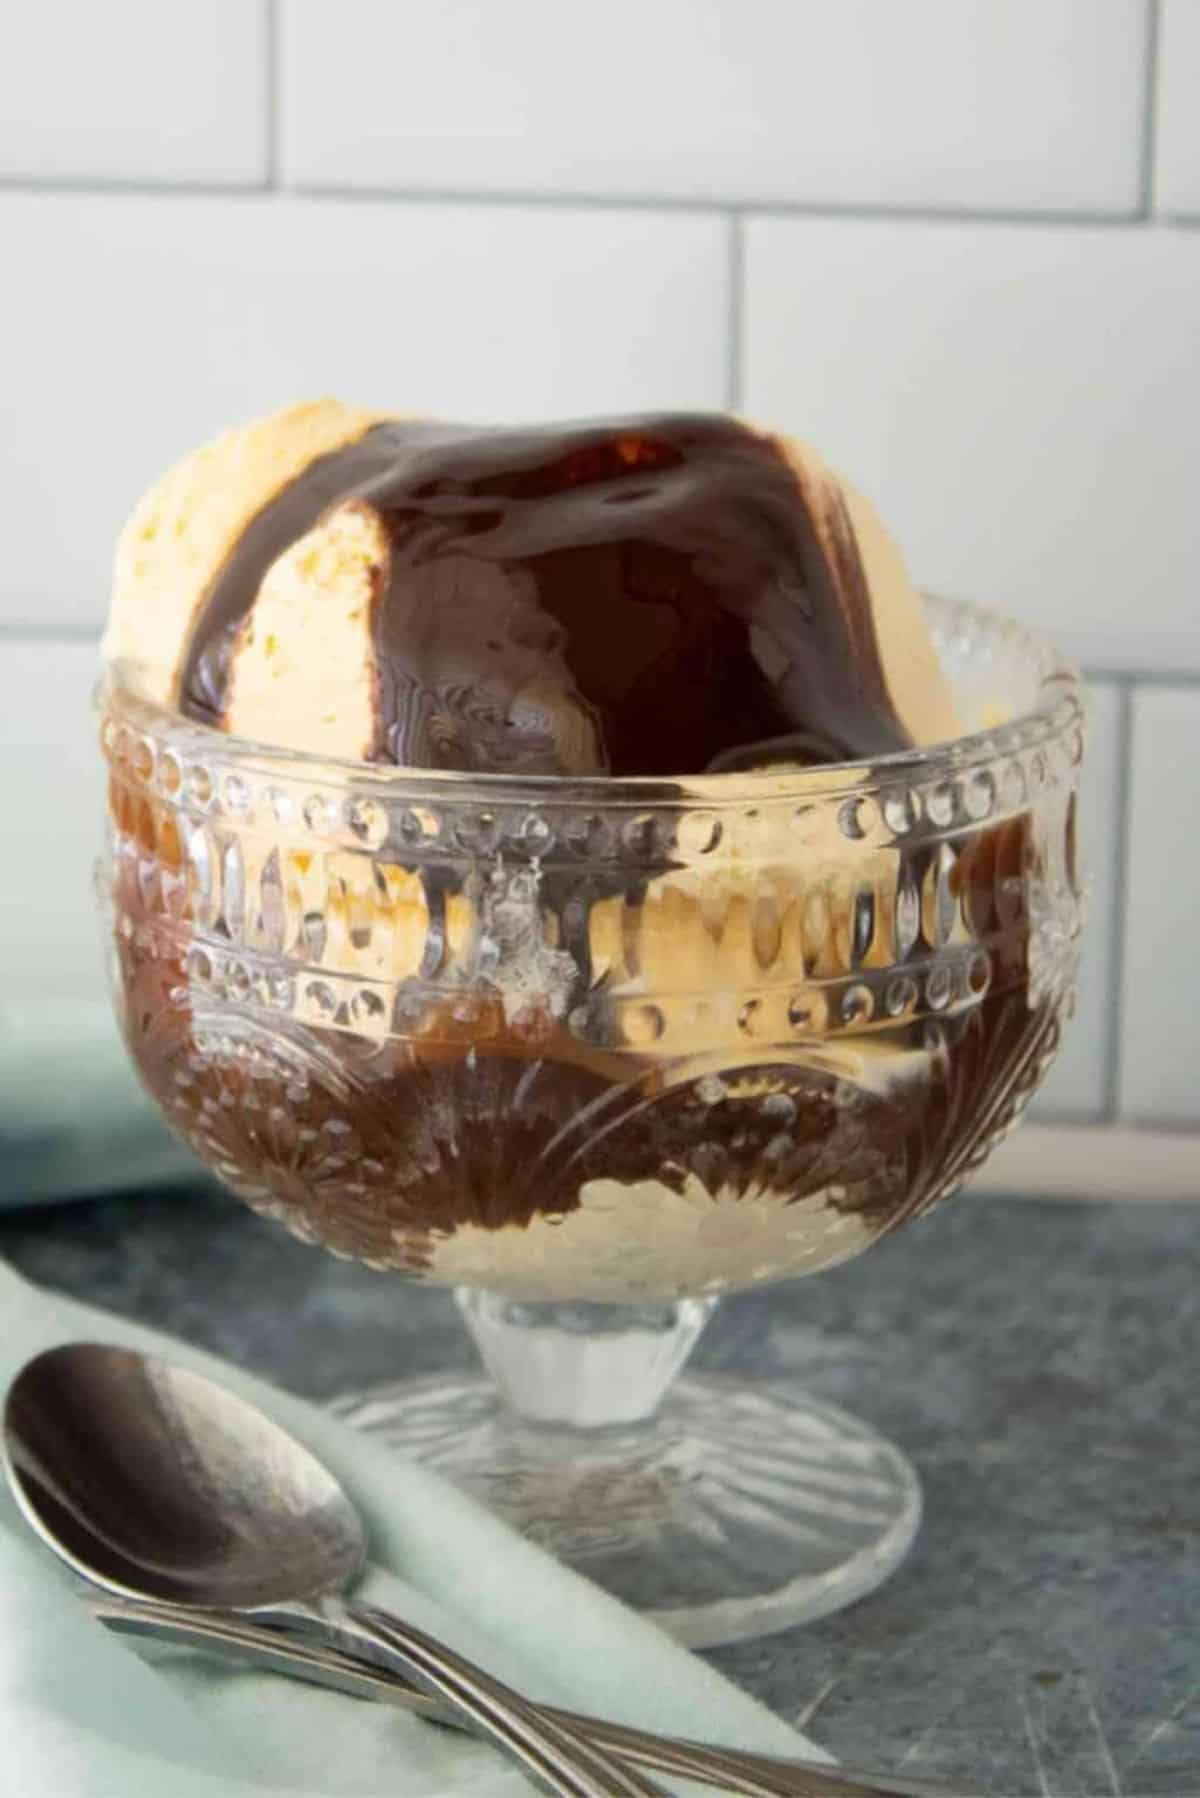 Copycat Hersey's Chocolate Syrup in a tall glass.